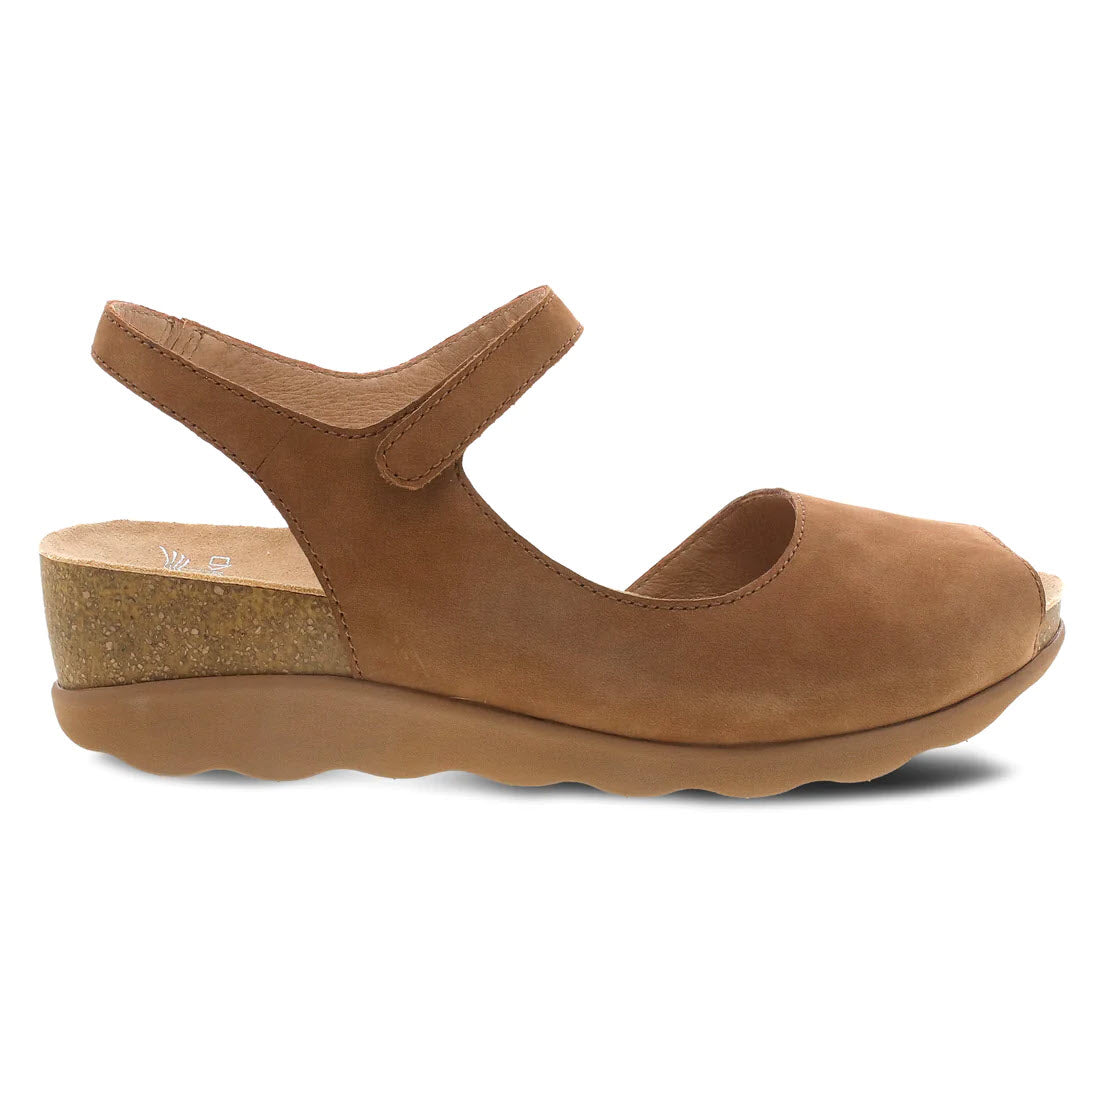 A single brown Dansko Marcy Tan Nubuck sandal with a cork platform heel and an adjustable ankle strap, displayed against a white background.